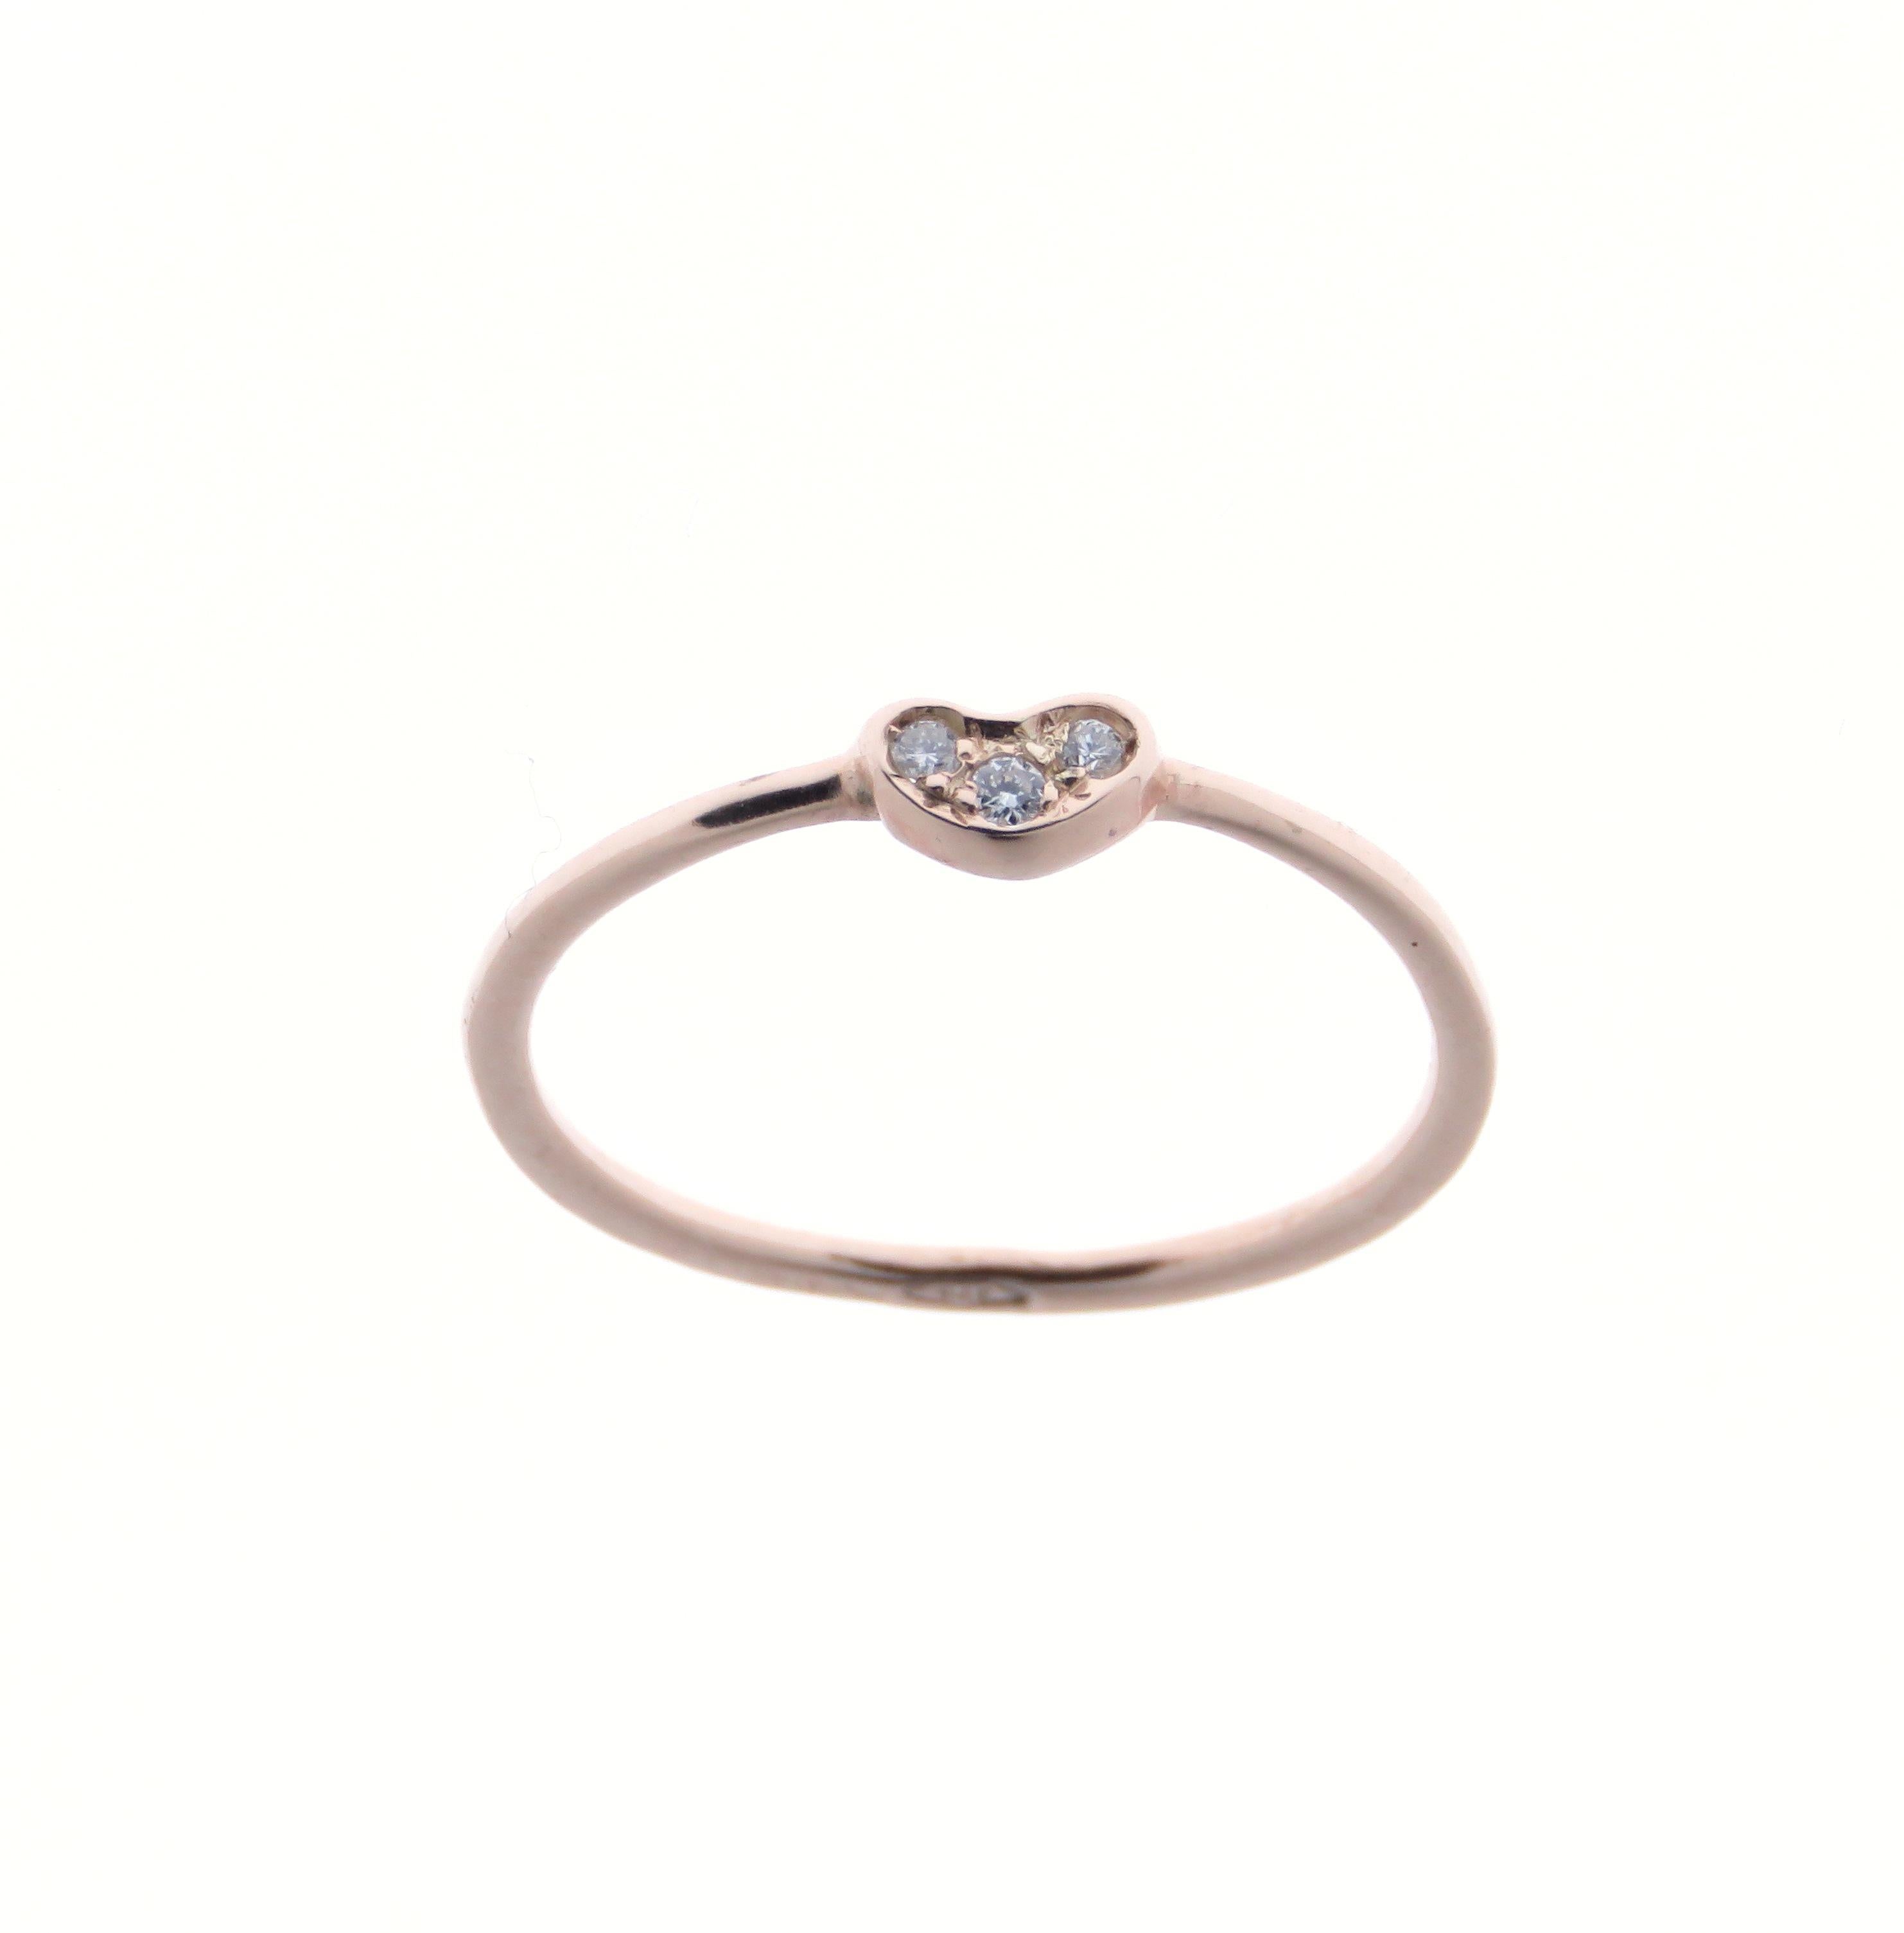 Brilliant Cut Diamonds White Rose Gold Stacking Ring Handcrafted in Italy by Botta Gioielli For Sale